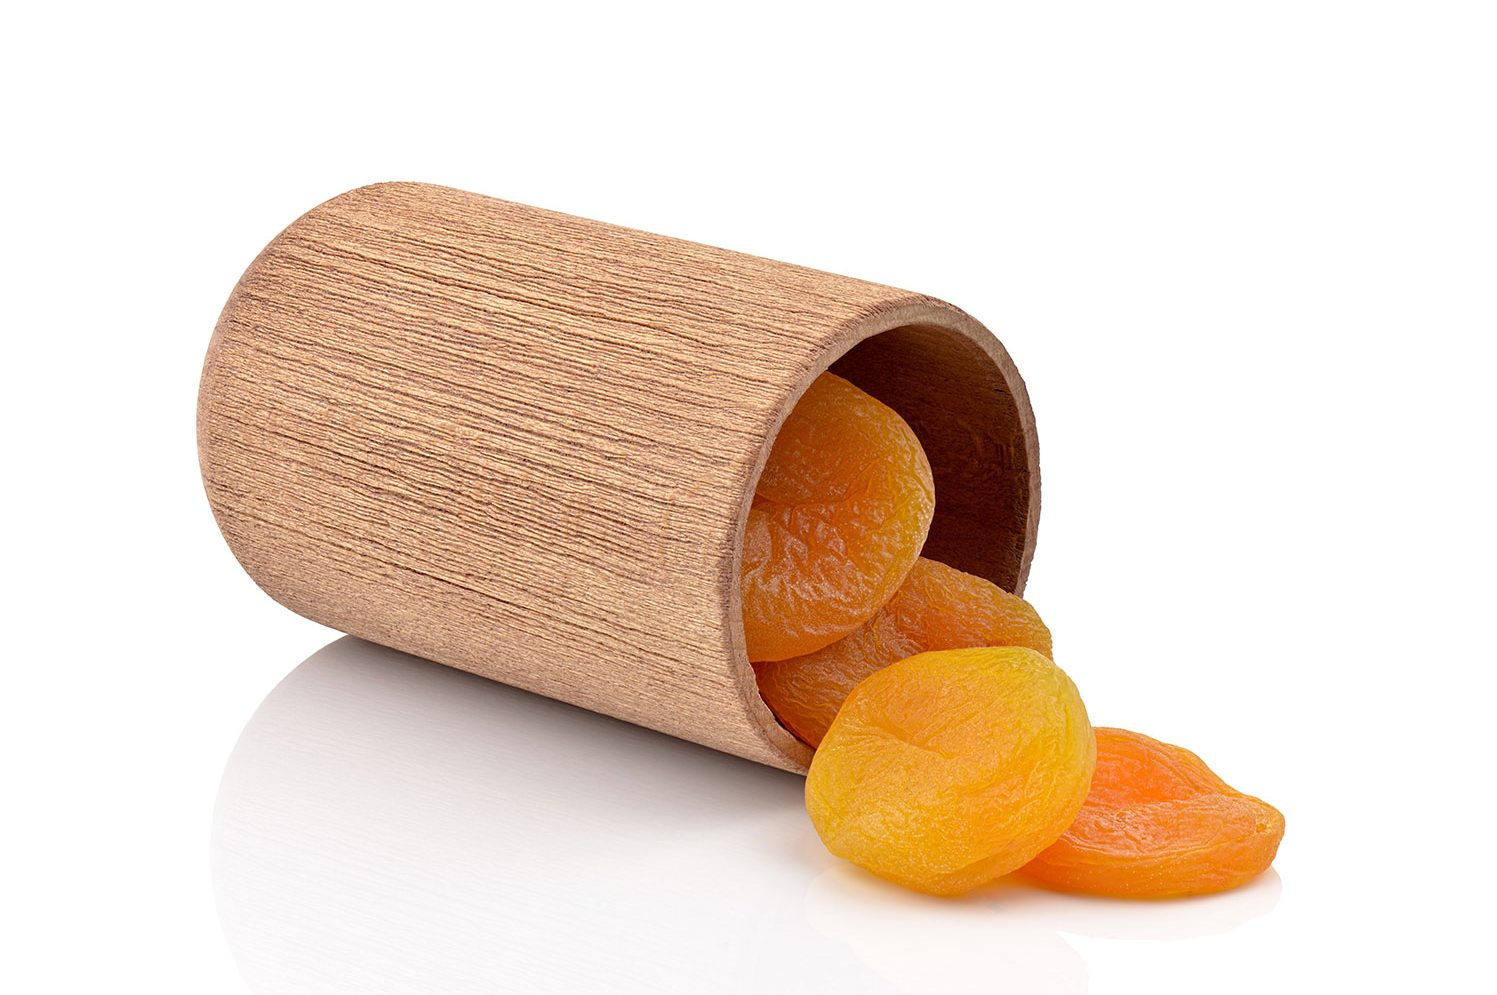 The Healthy Trends Market with Dried Apricots!